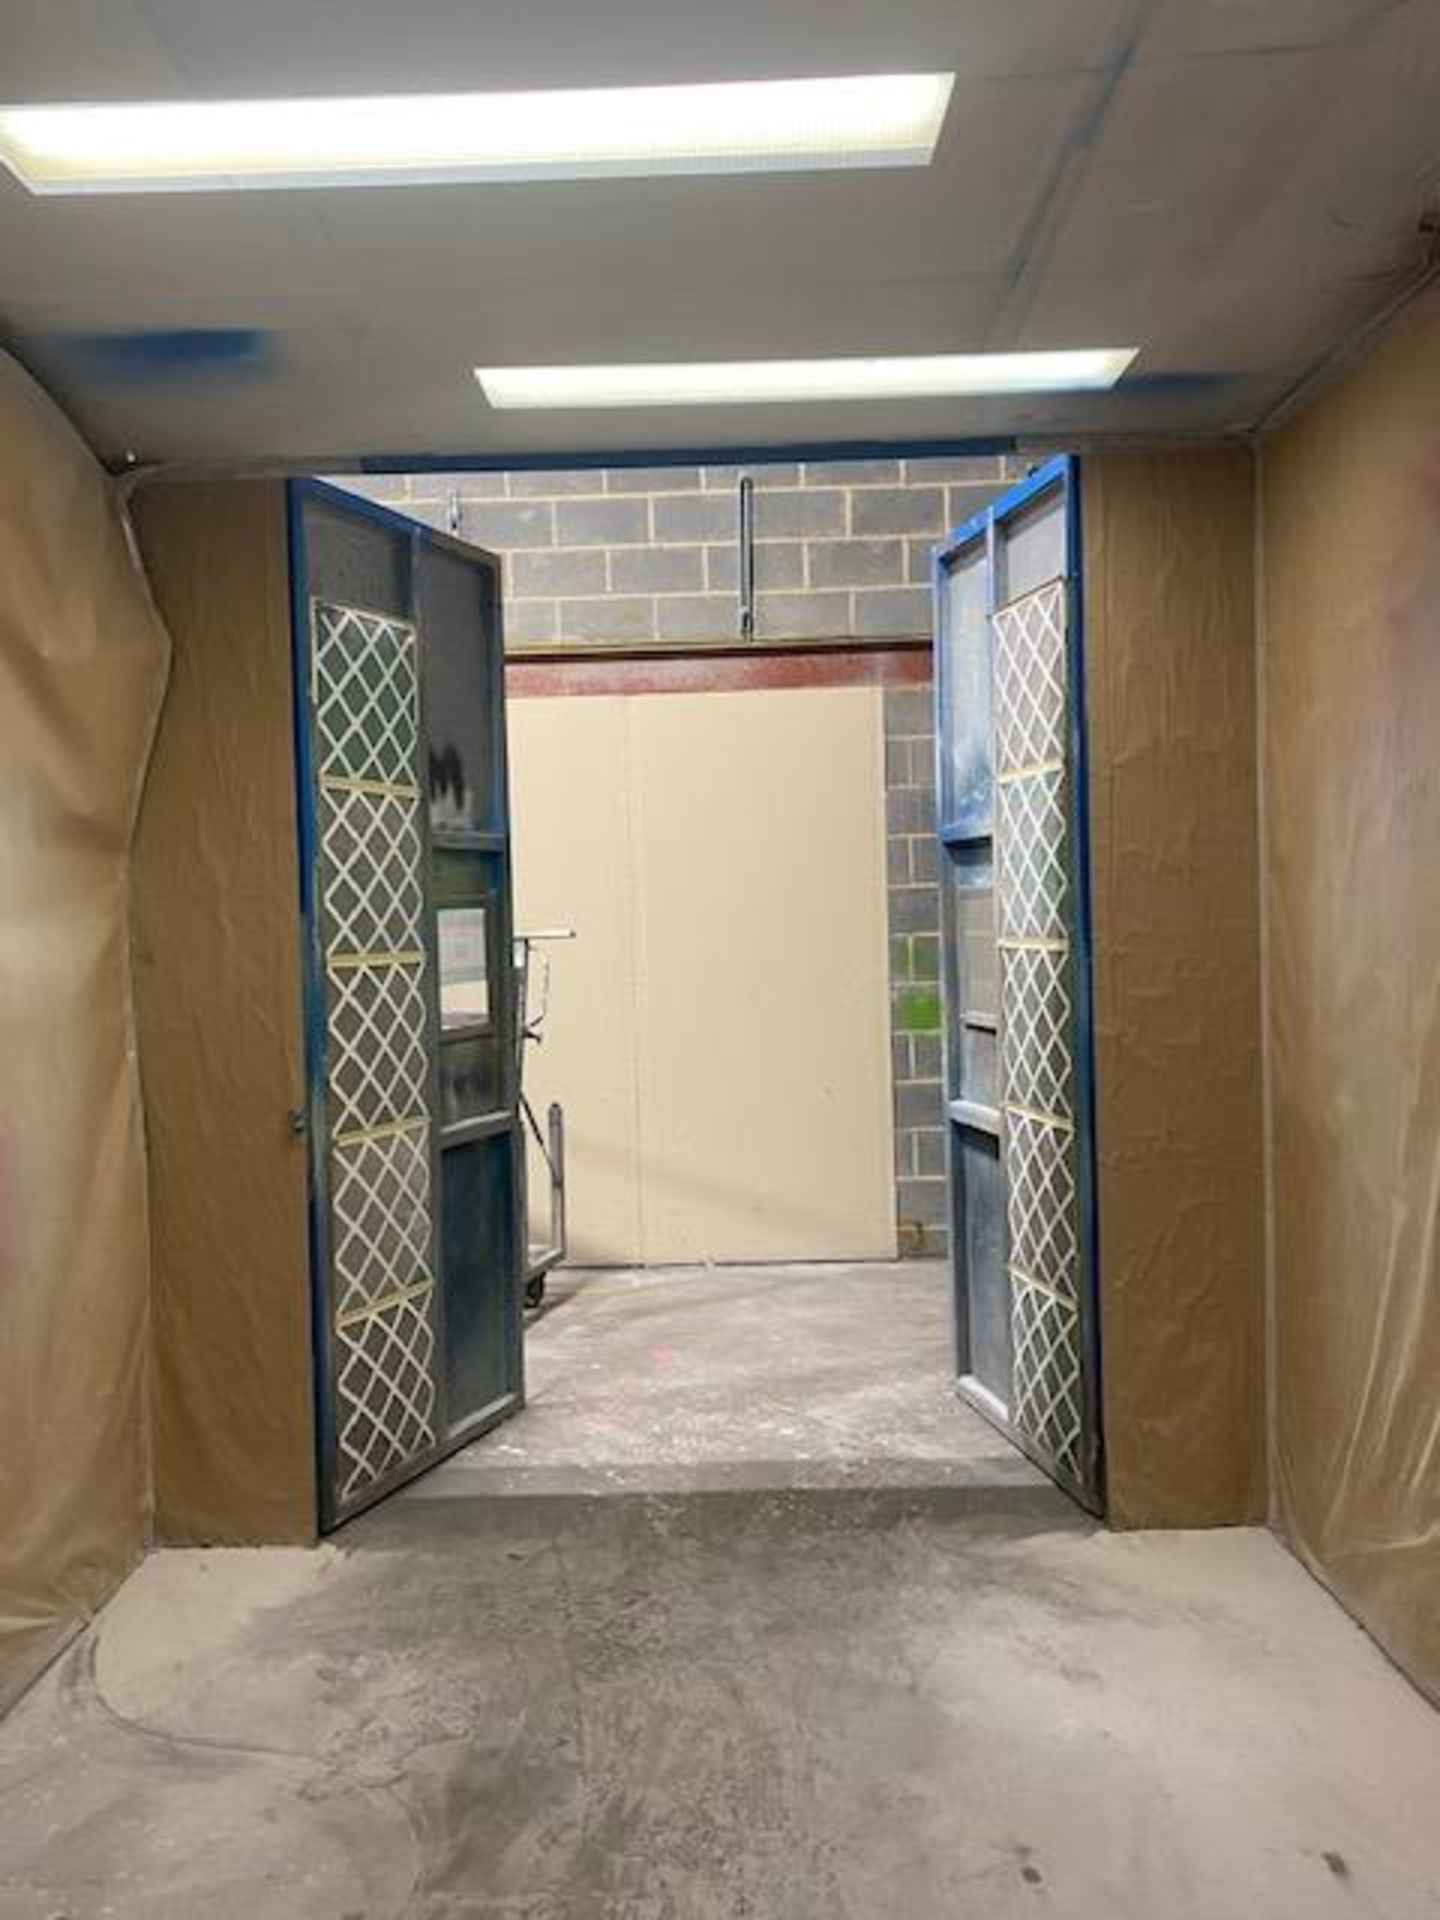 Purpose built spray booth c/w filtering unit and lighting size approx L 5.5m W 3.2m H 3.1m (Internal - Image 5 of 8